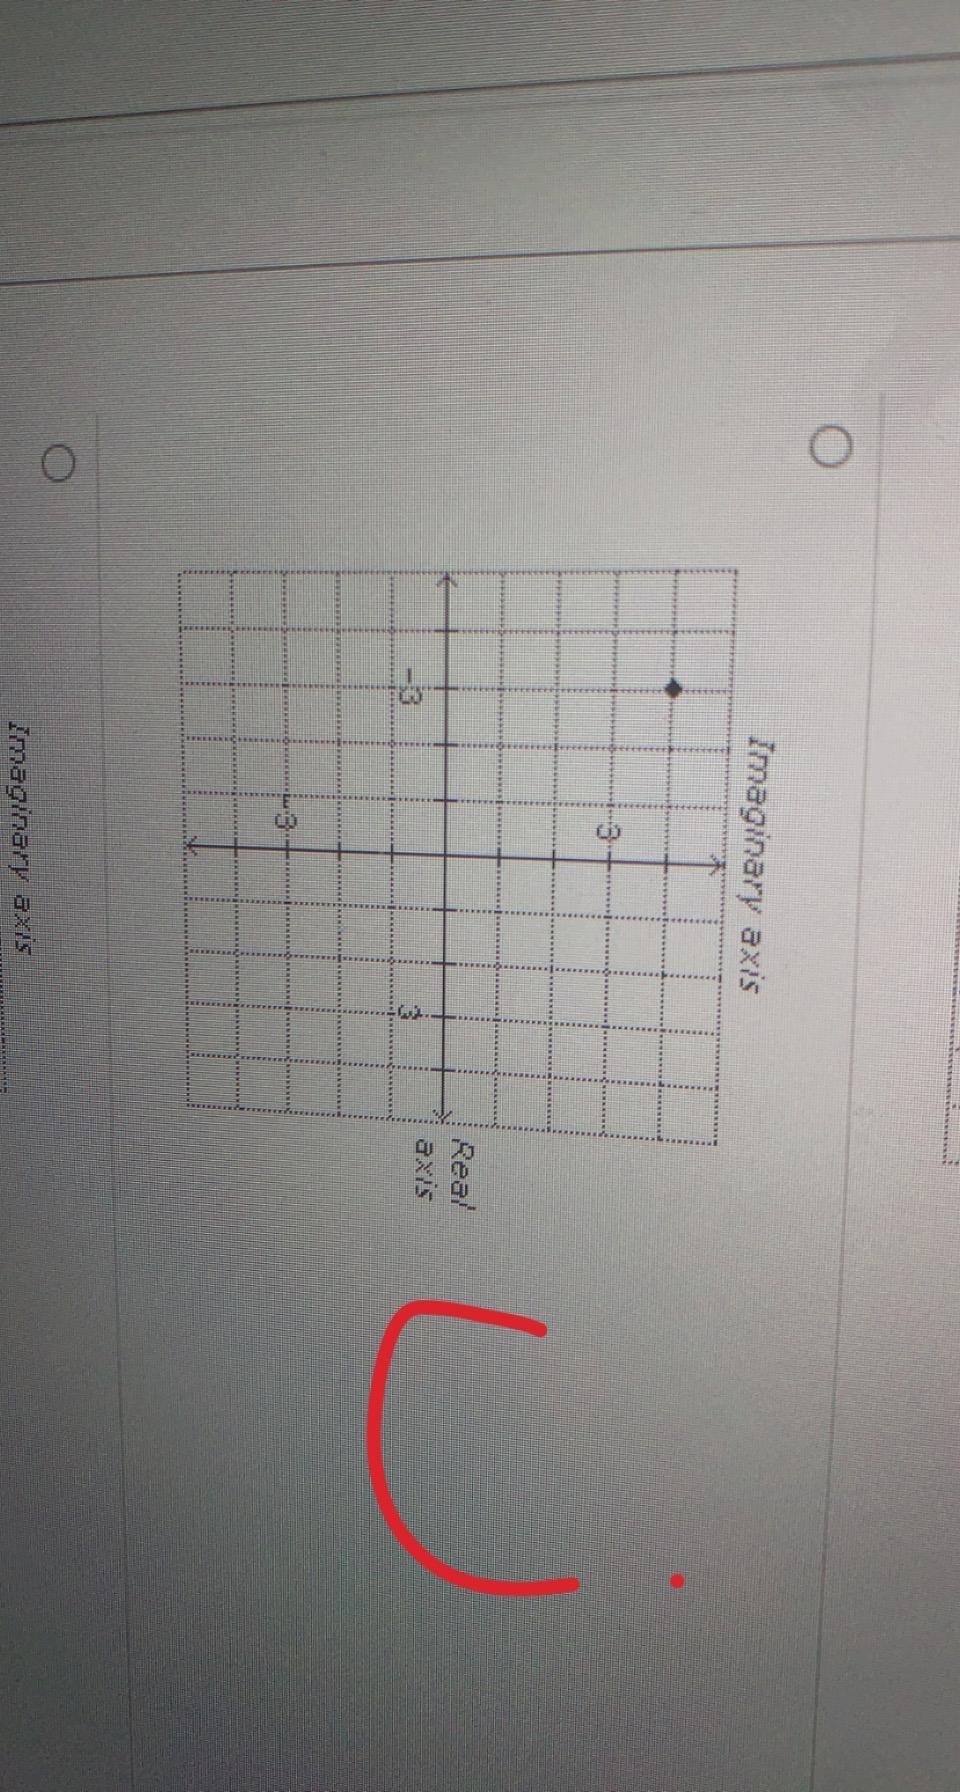 I Need Help With This Question Please. I Also Have Options Available 